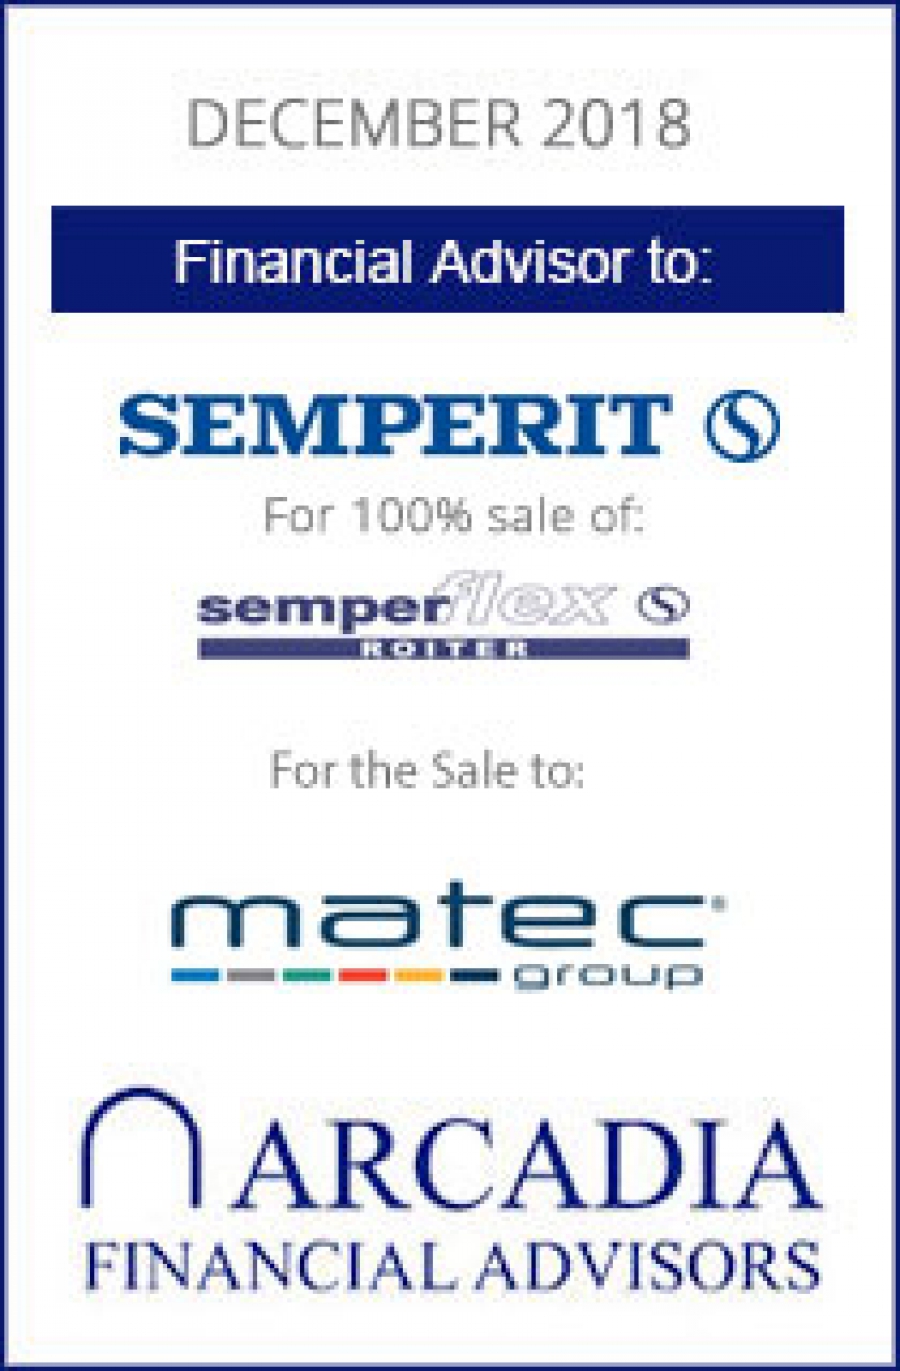 Transaction completed with Semperit